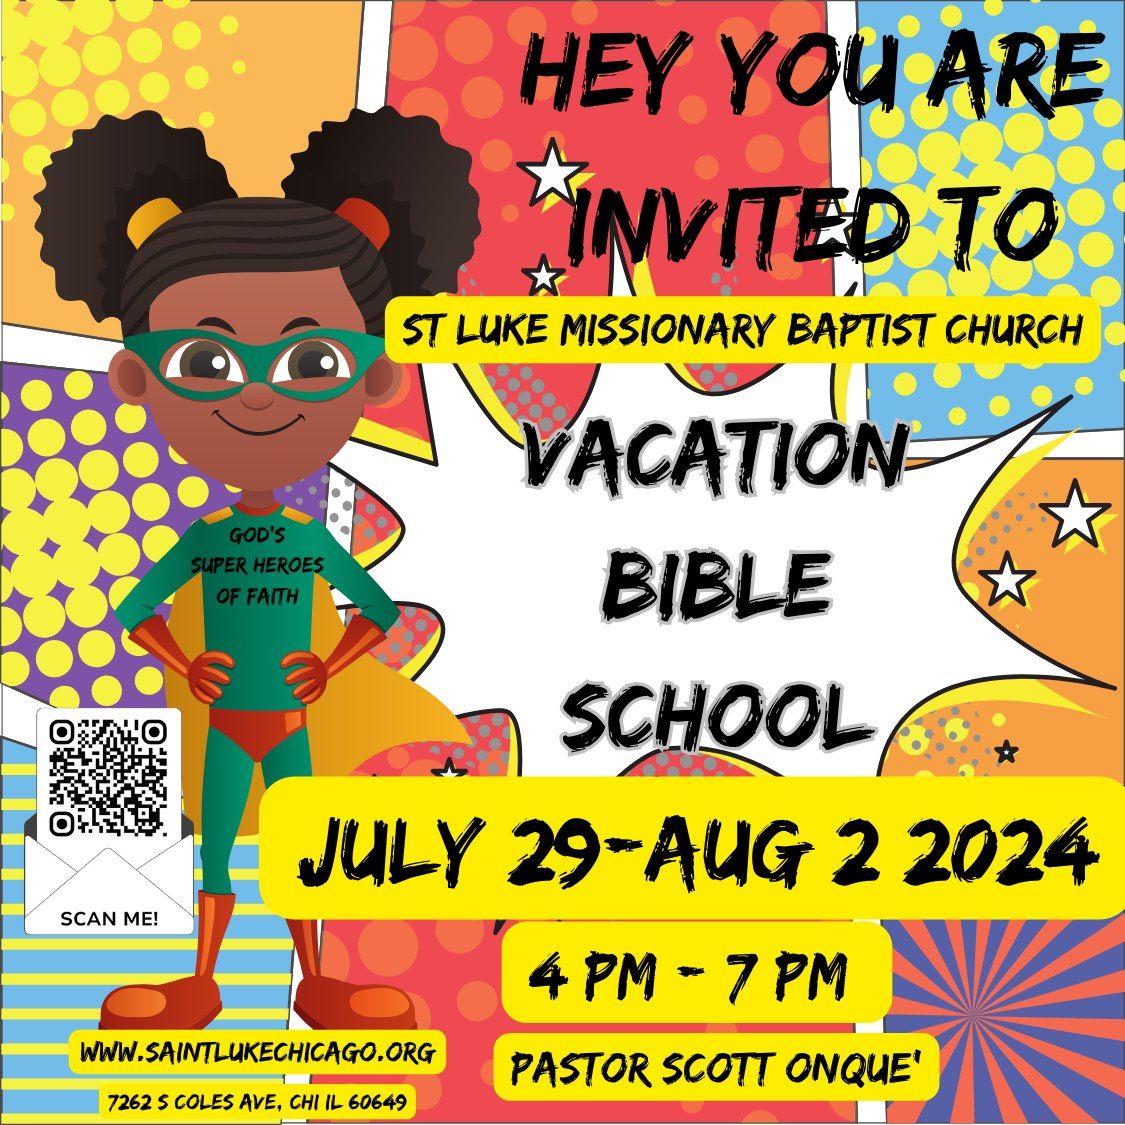 Vacation Bible School 4 PM to 7 PM Nightly